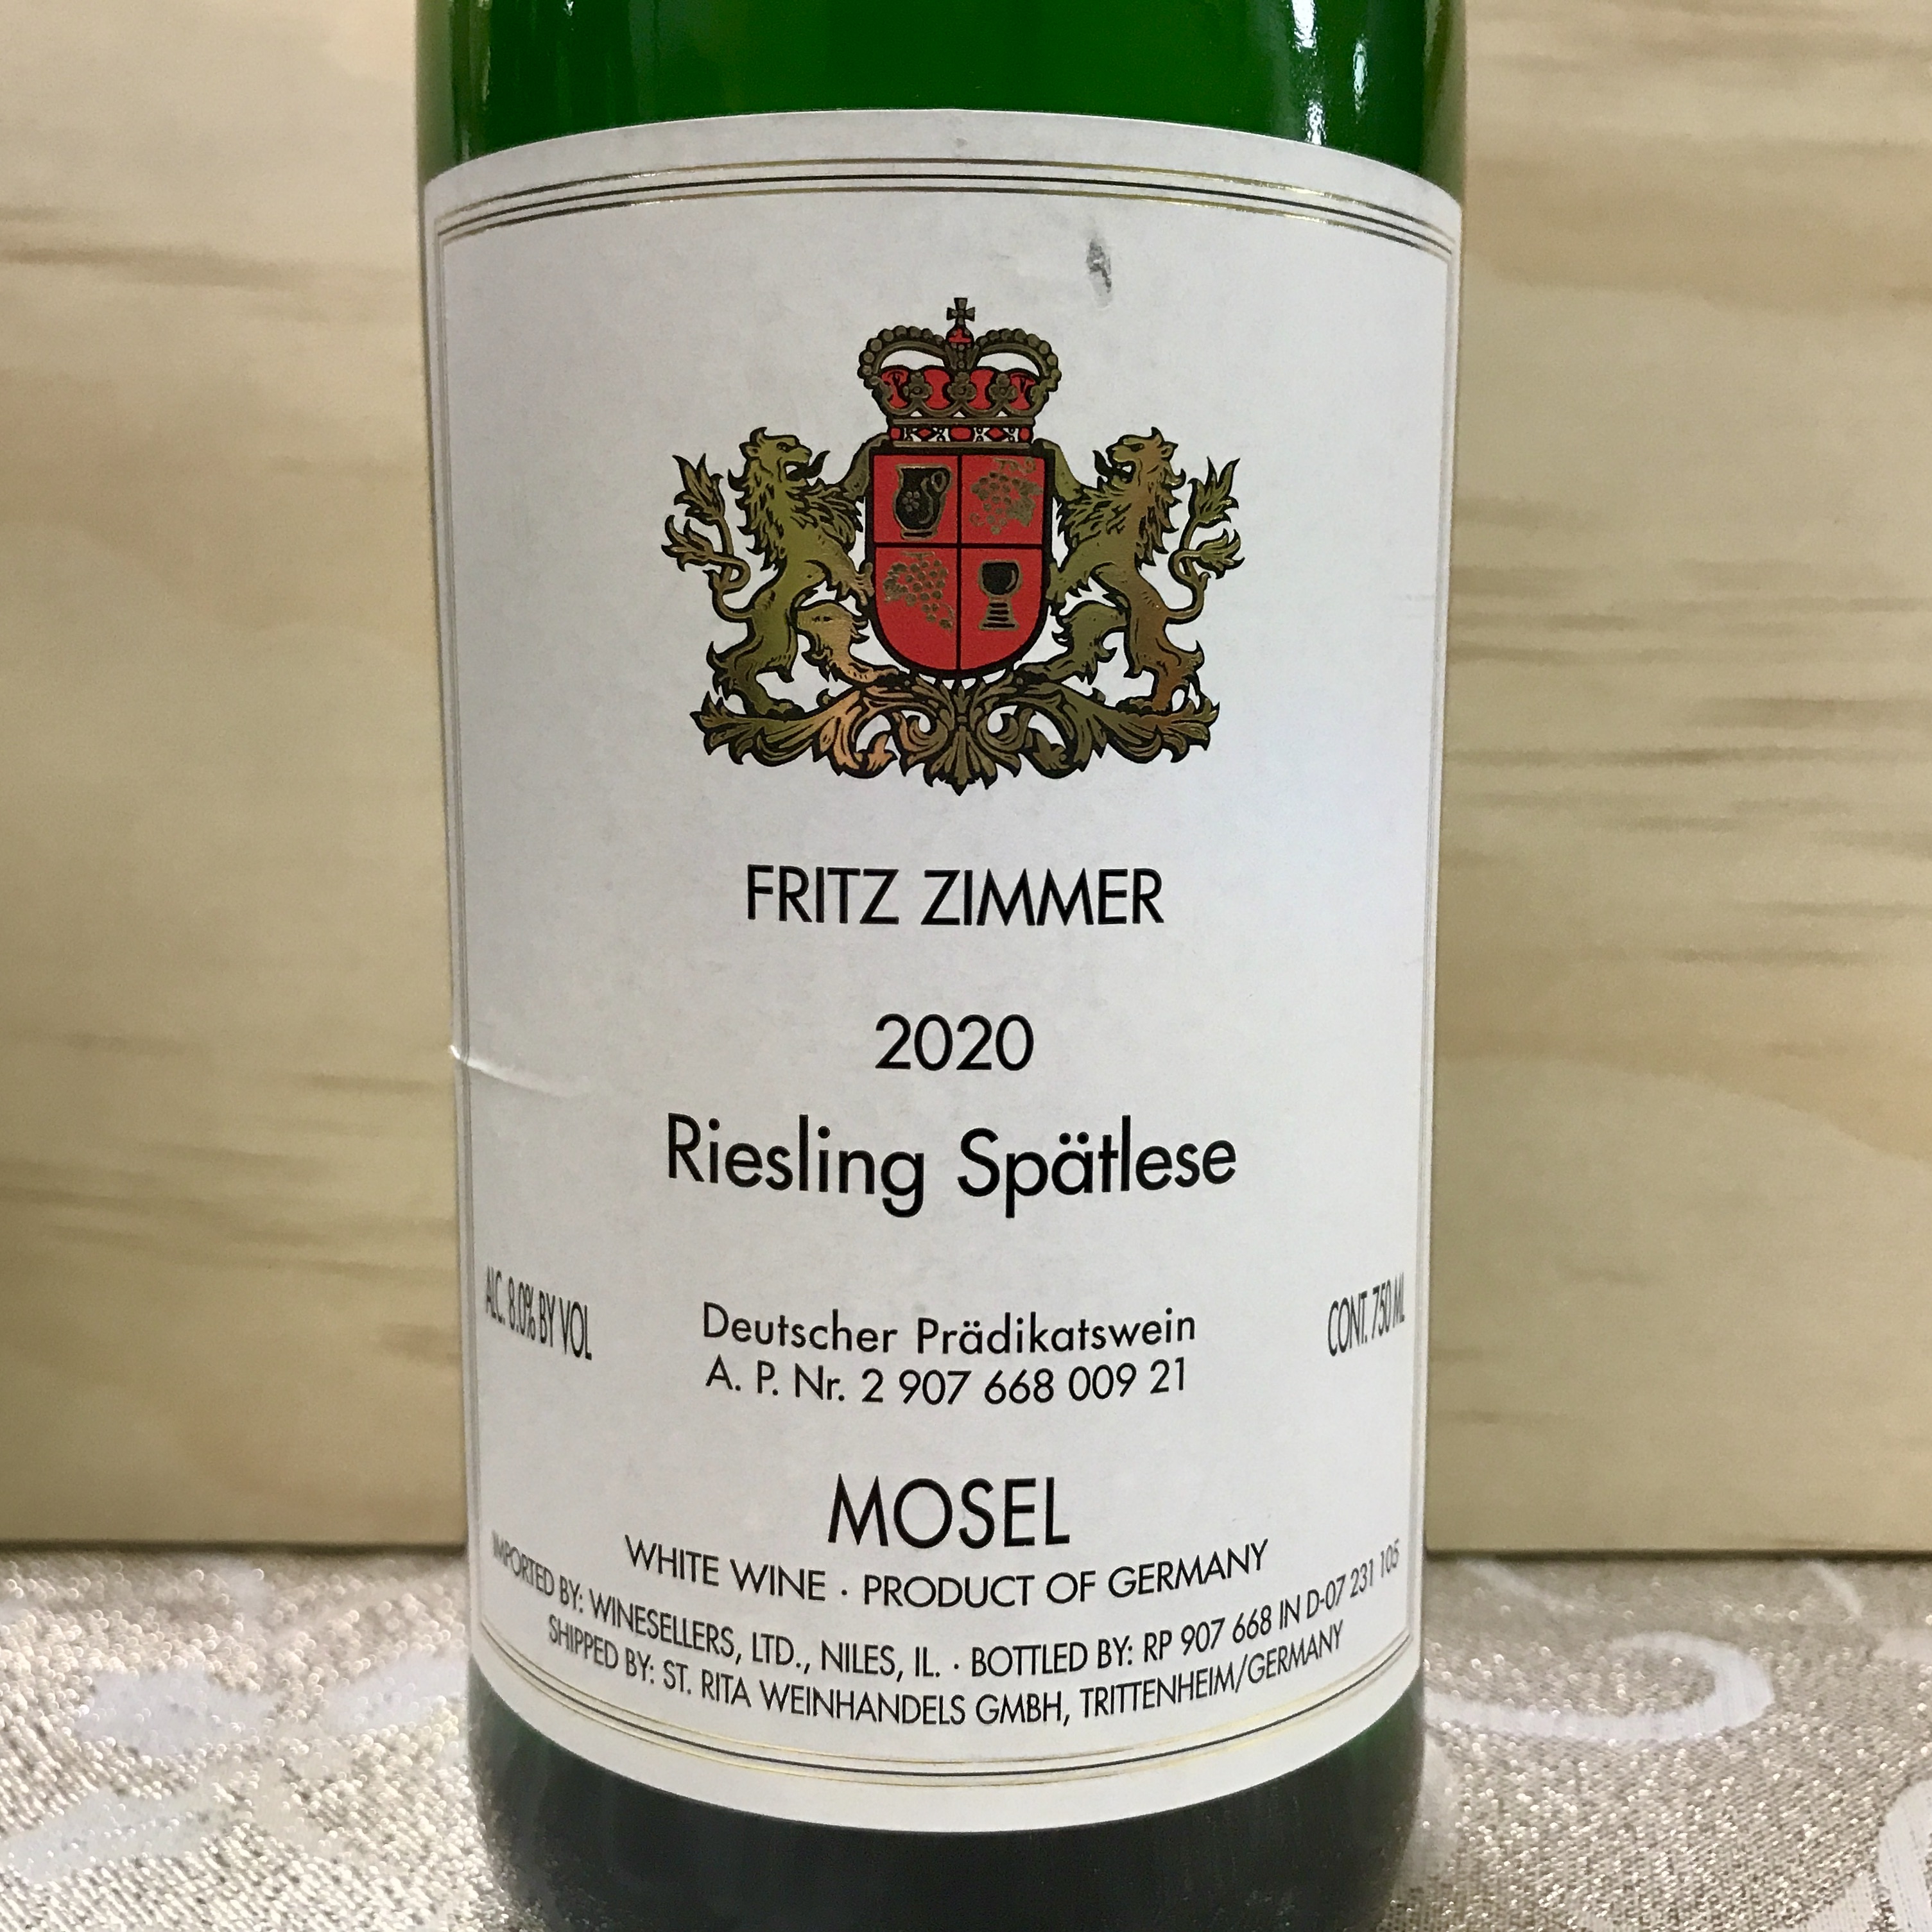 Fritz Zimmer Riesling Spatlese 2020 Mosel